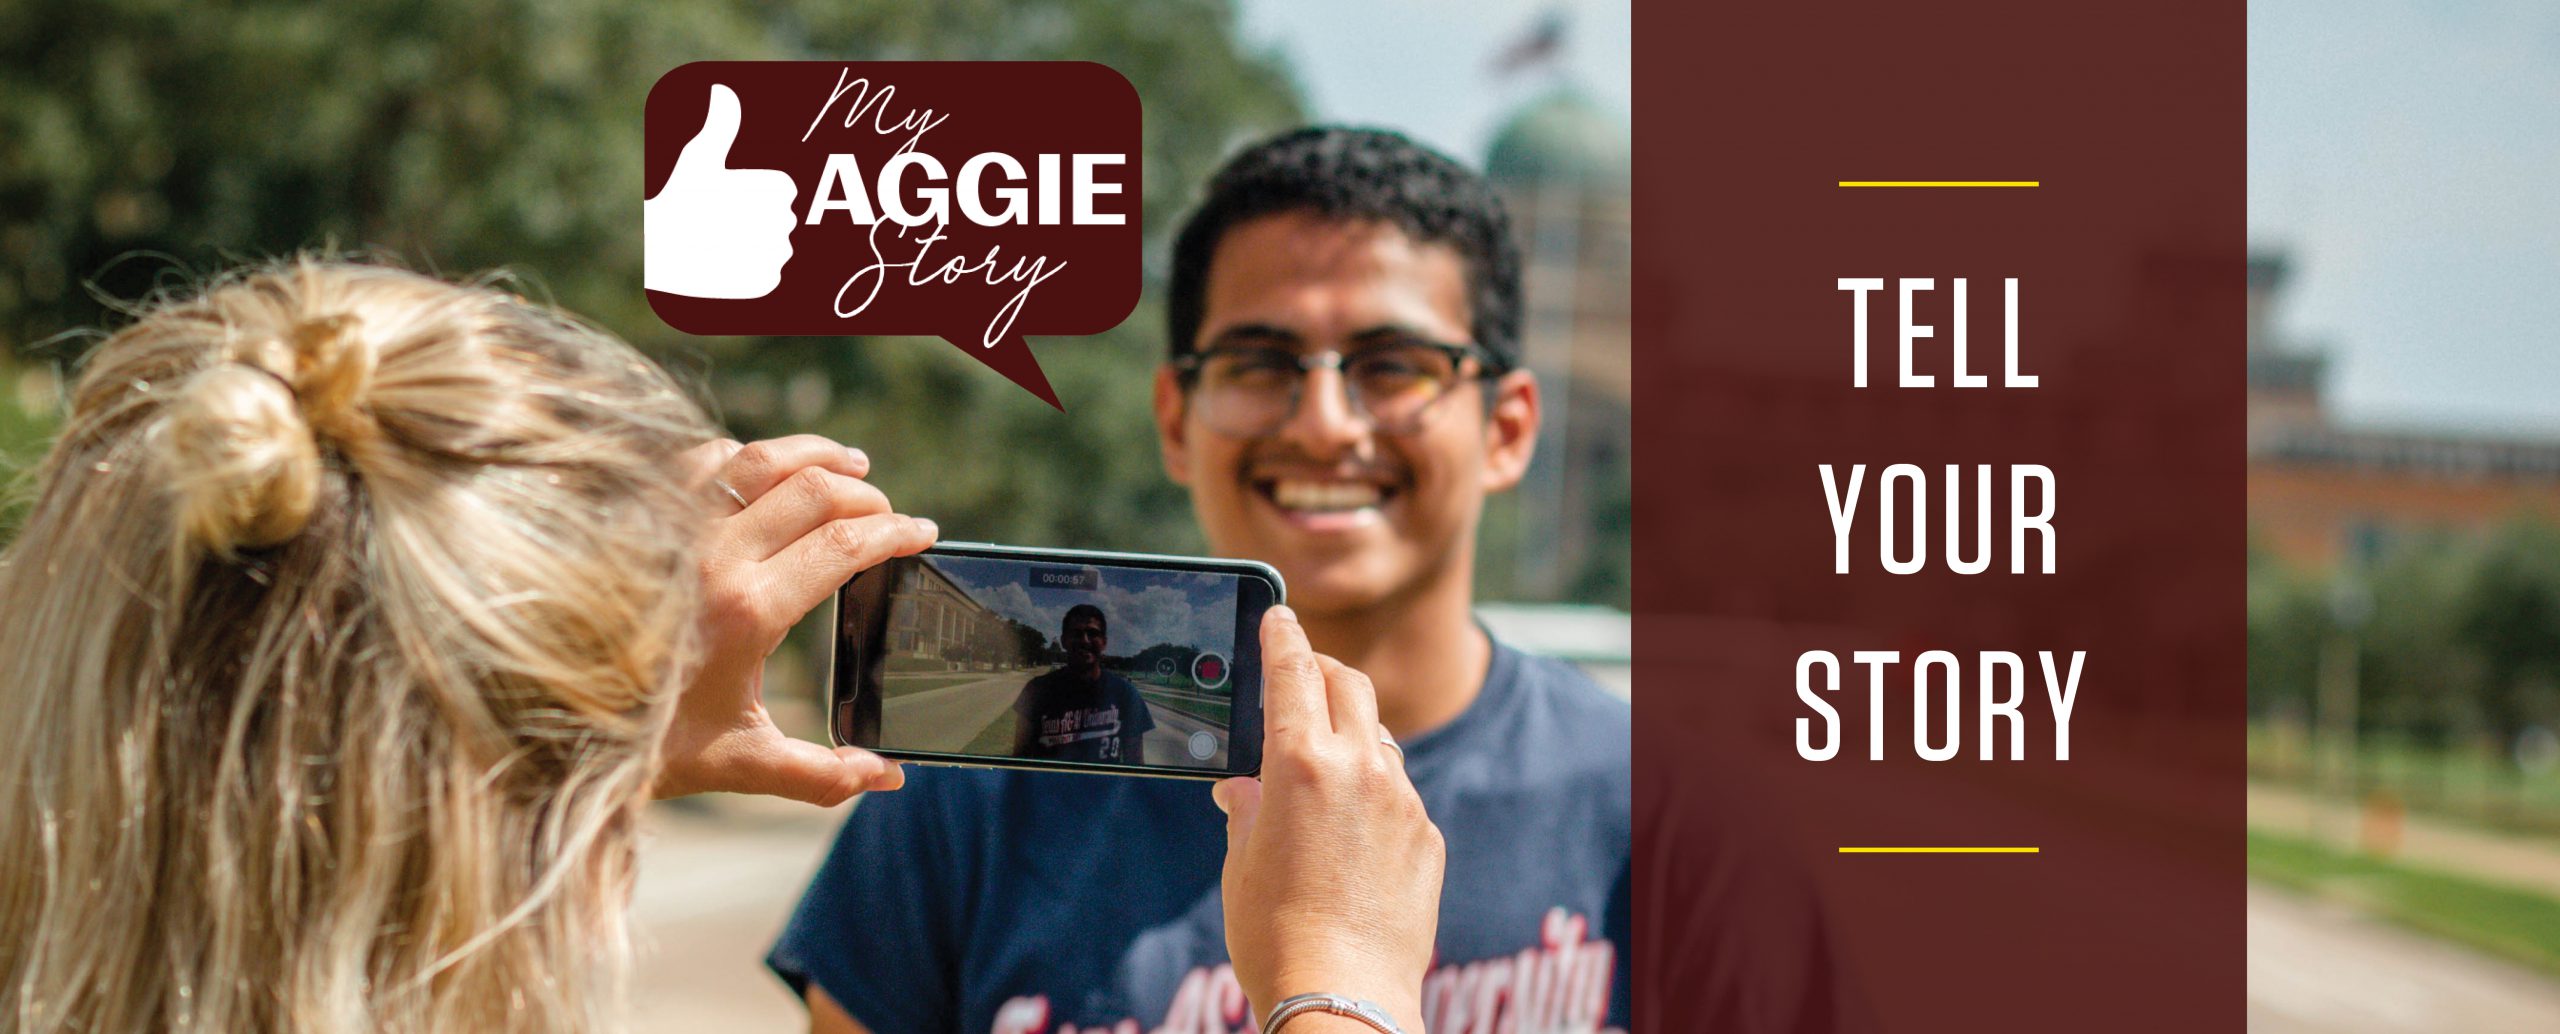 My Aggie Story: Tell Your Story